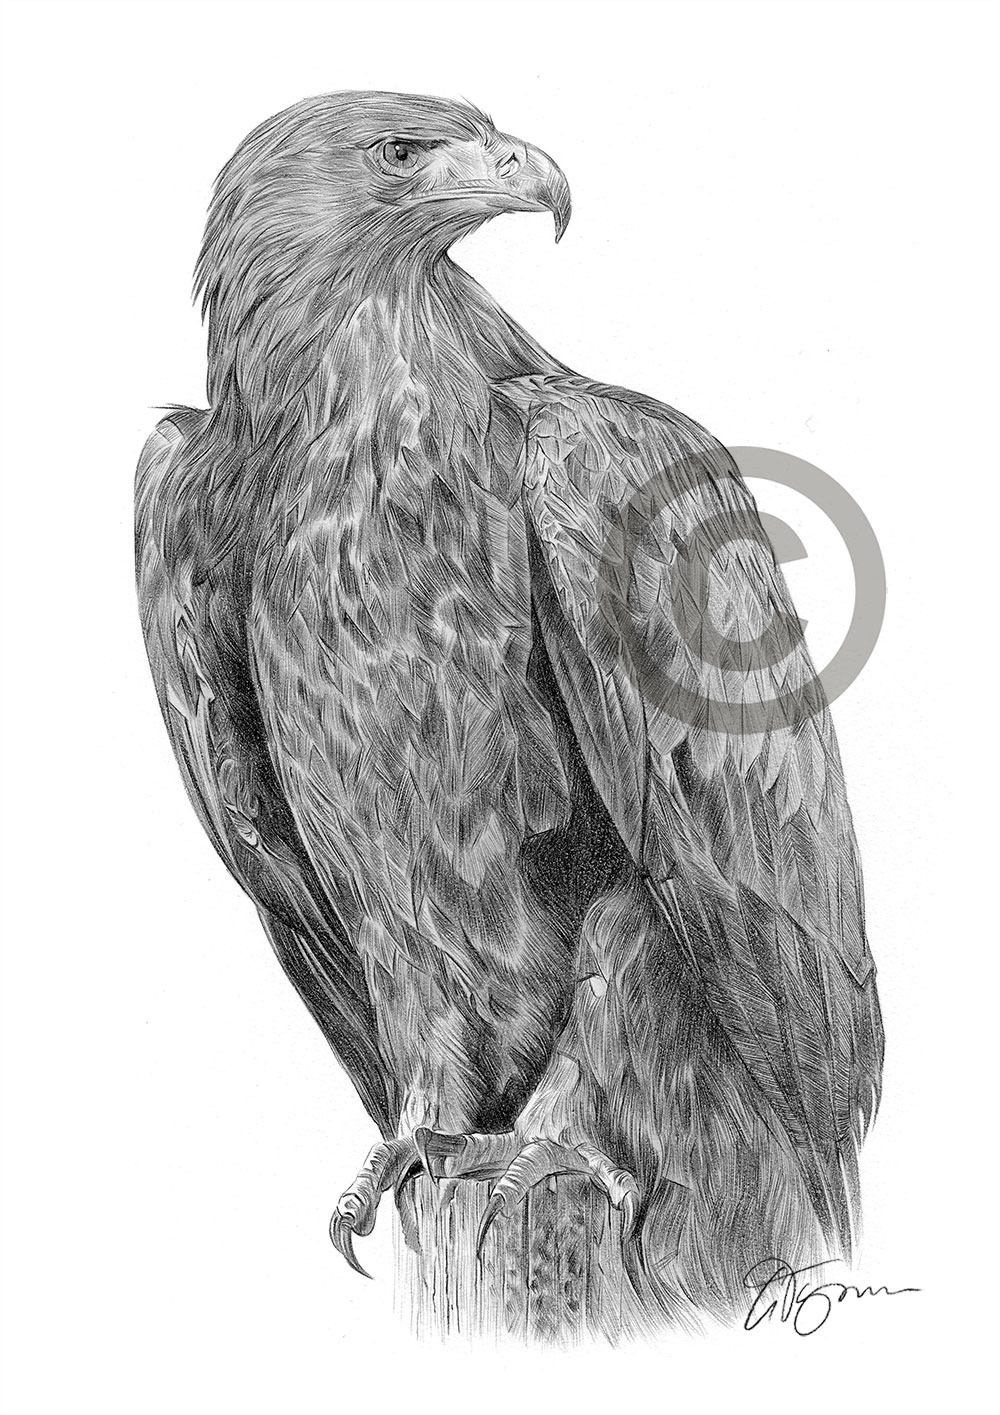 Pencil drawing of a golden eagle by artist Gary Tymon